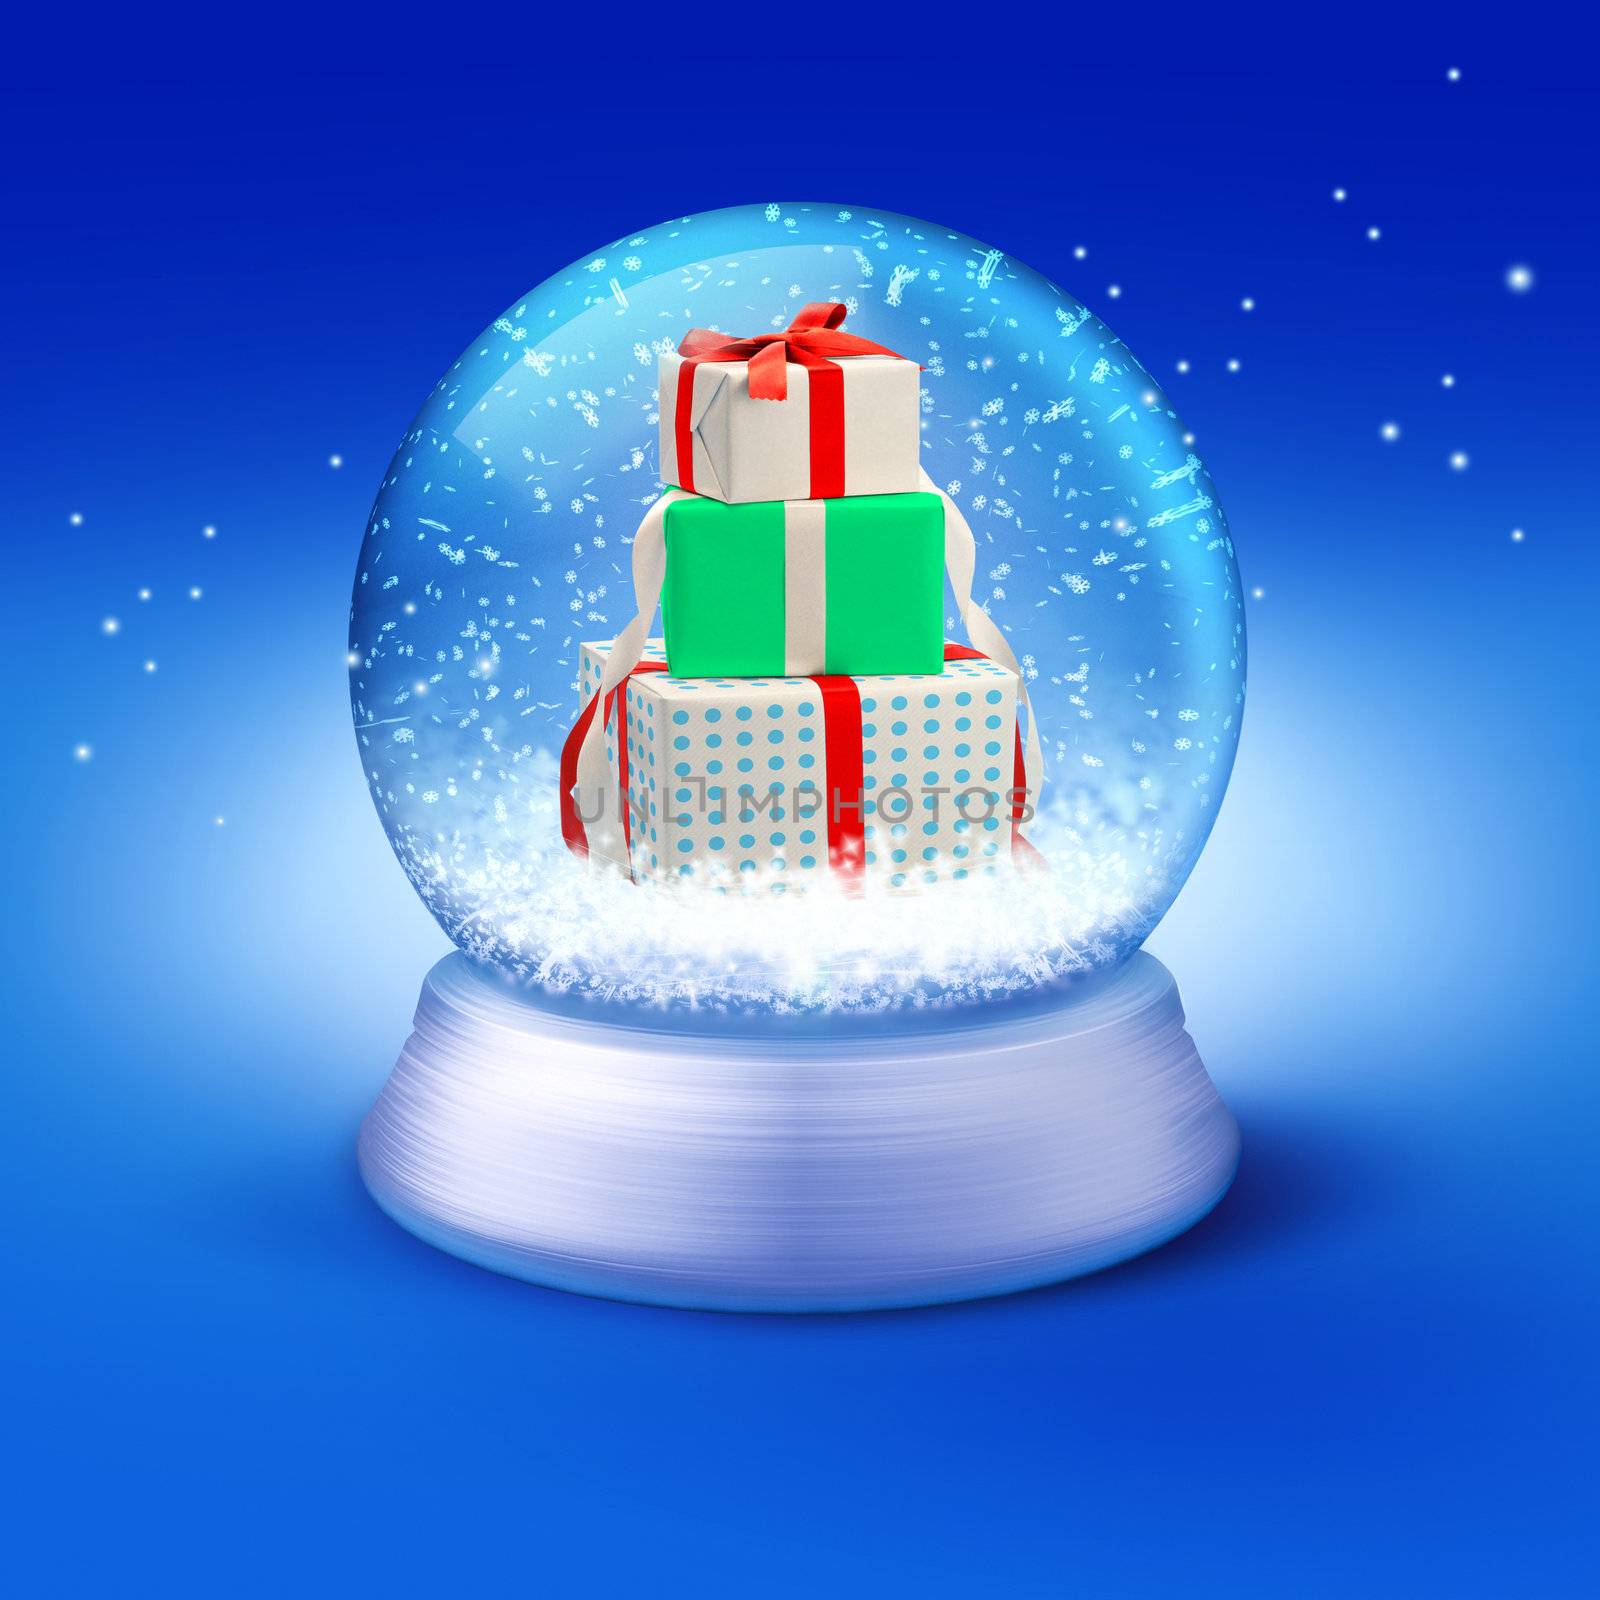 Realistic illustration of snow-dome with gifts against a blue background